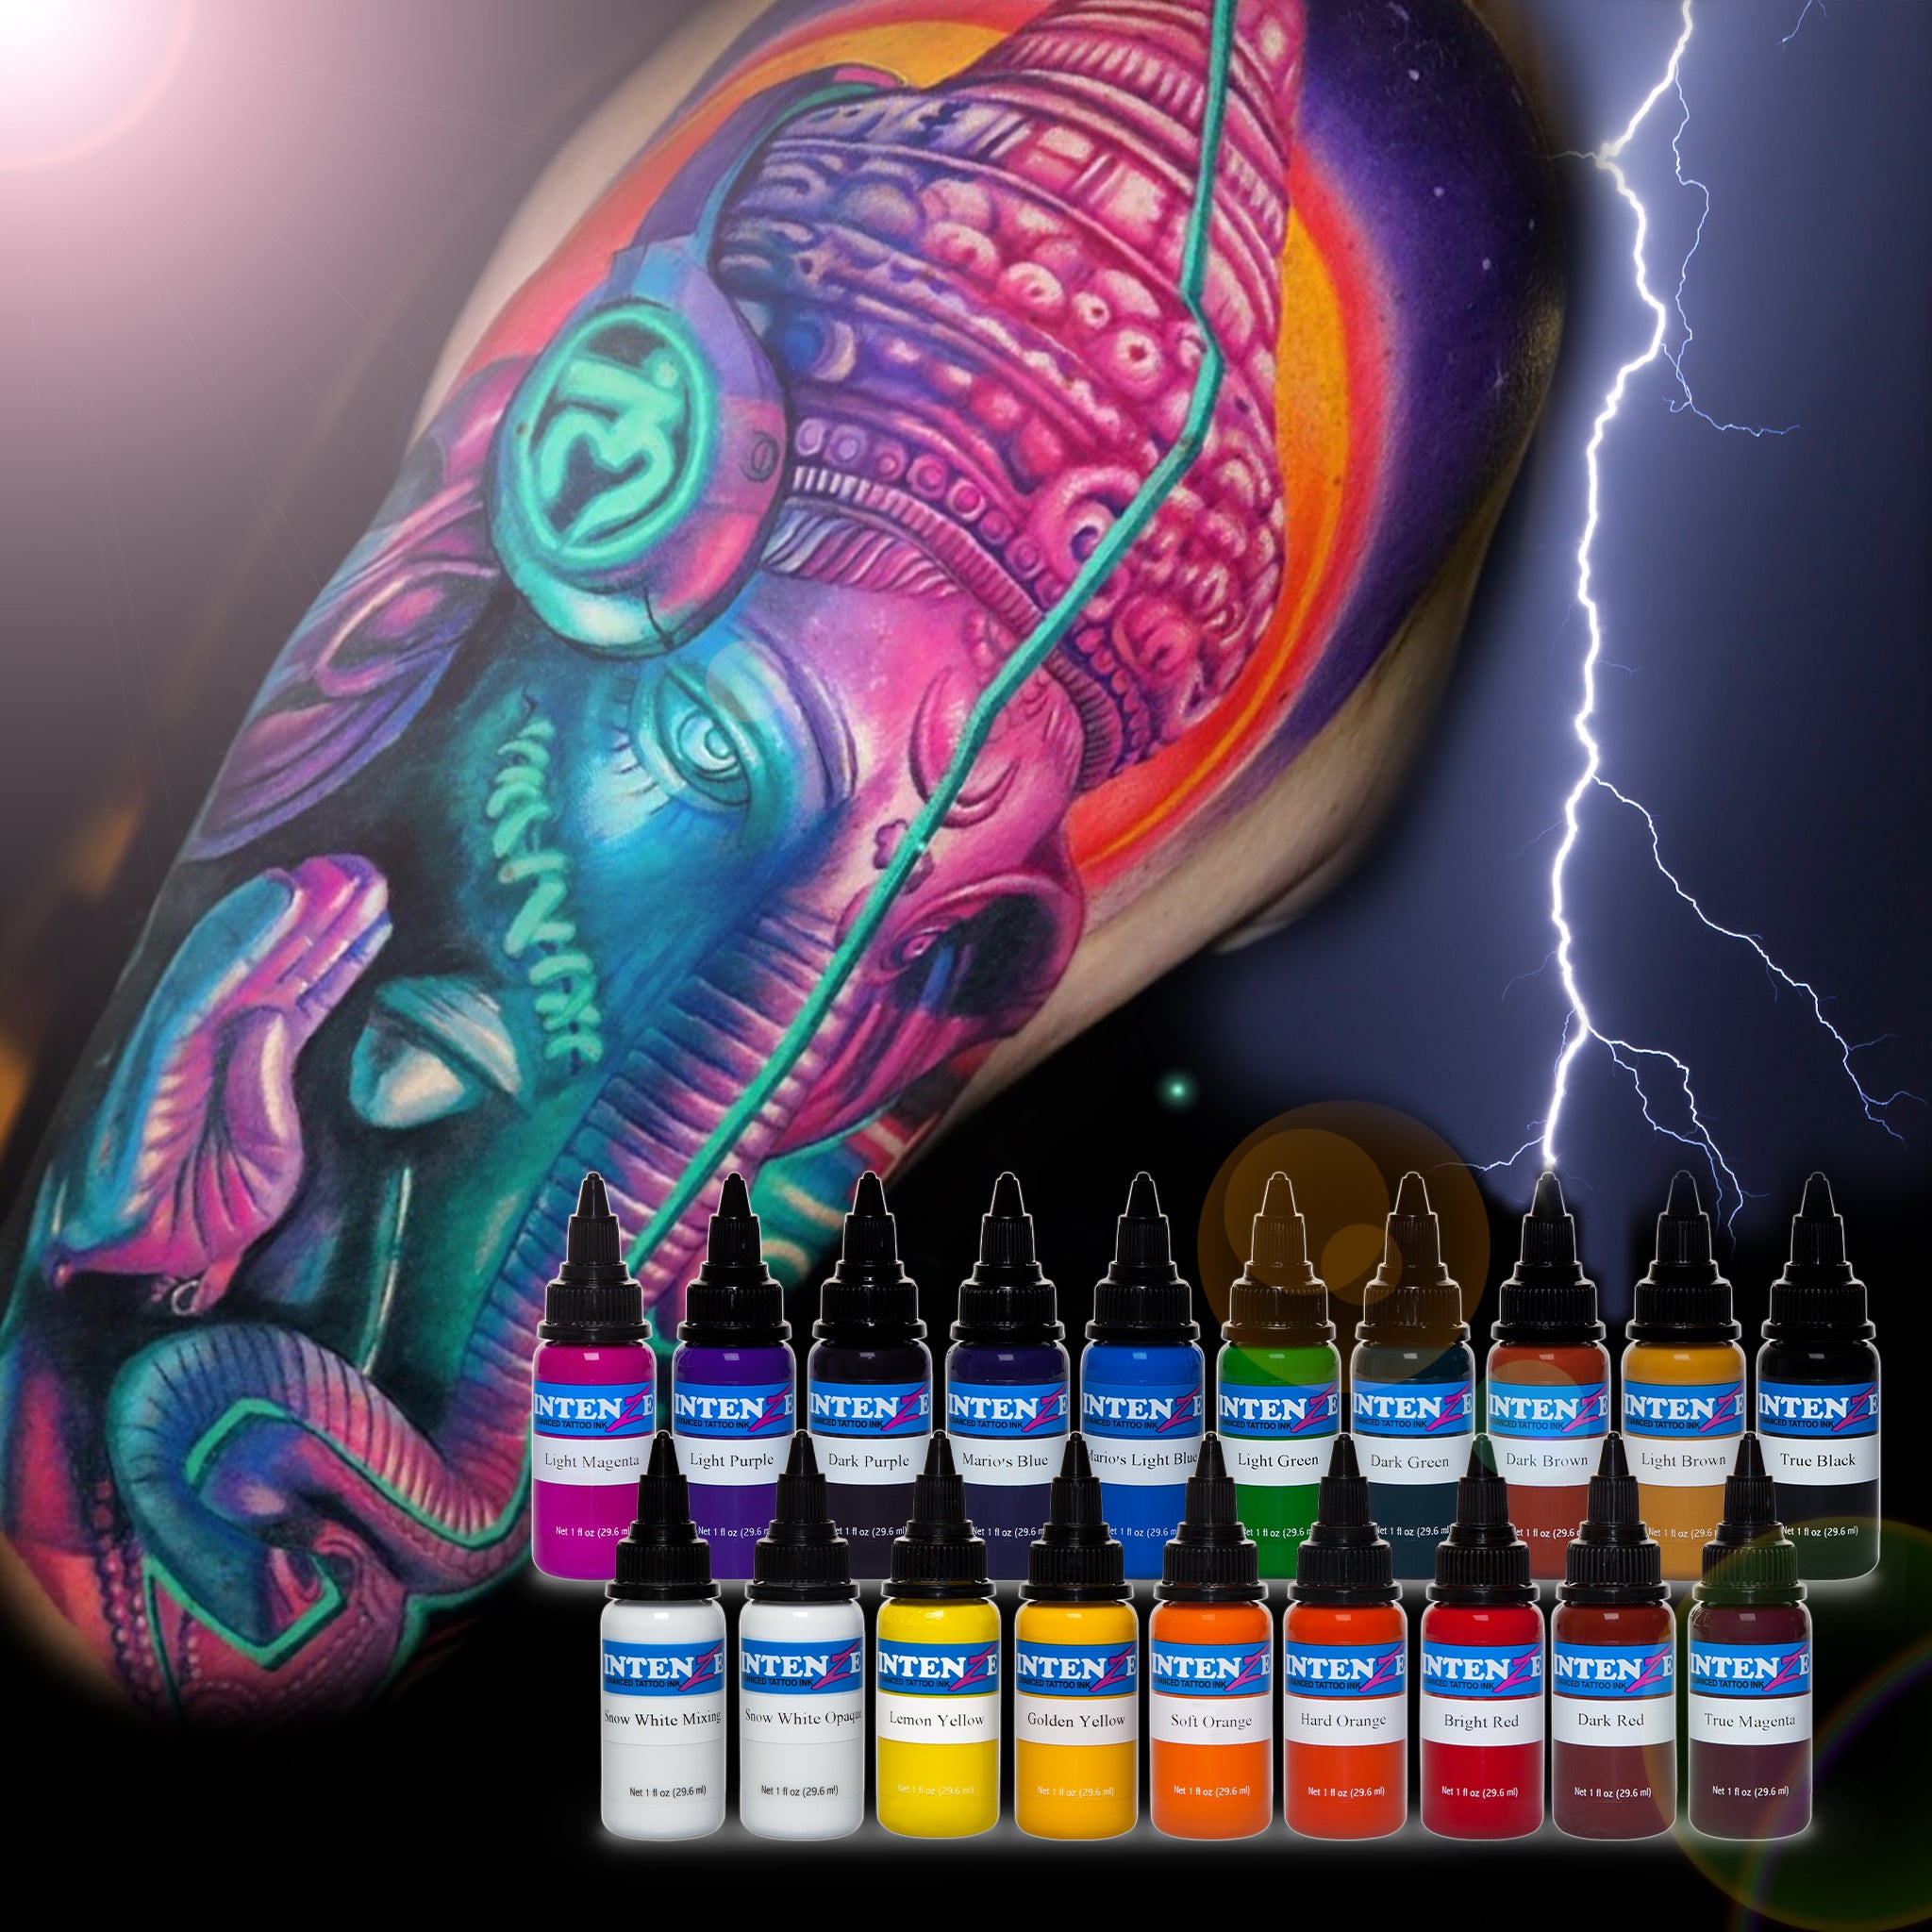 Unmatched 19 Color Tattoo Ink Set by Intenze - Intenze Tattoo Ink